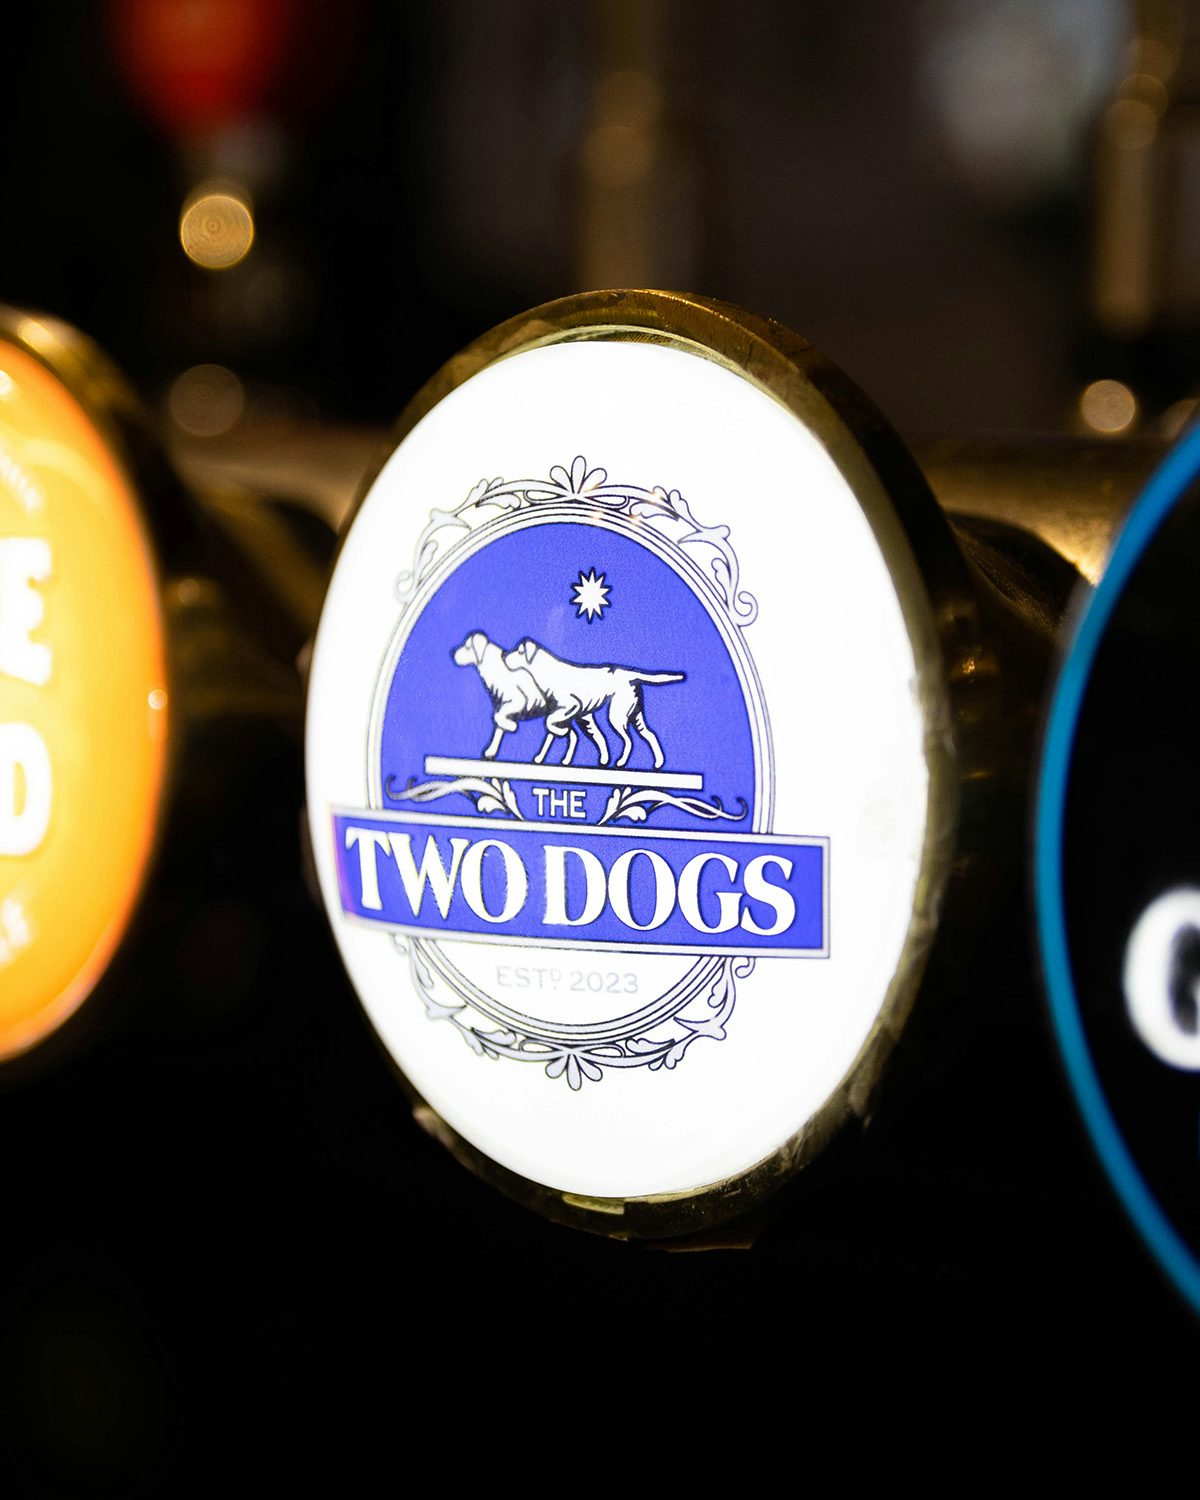 Image shows a pub keg badge for Overmono's pop-up beer brand Two Dogs, featuring a blue background and an illustration of two dogs